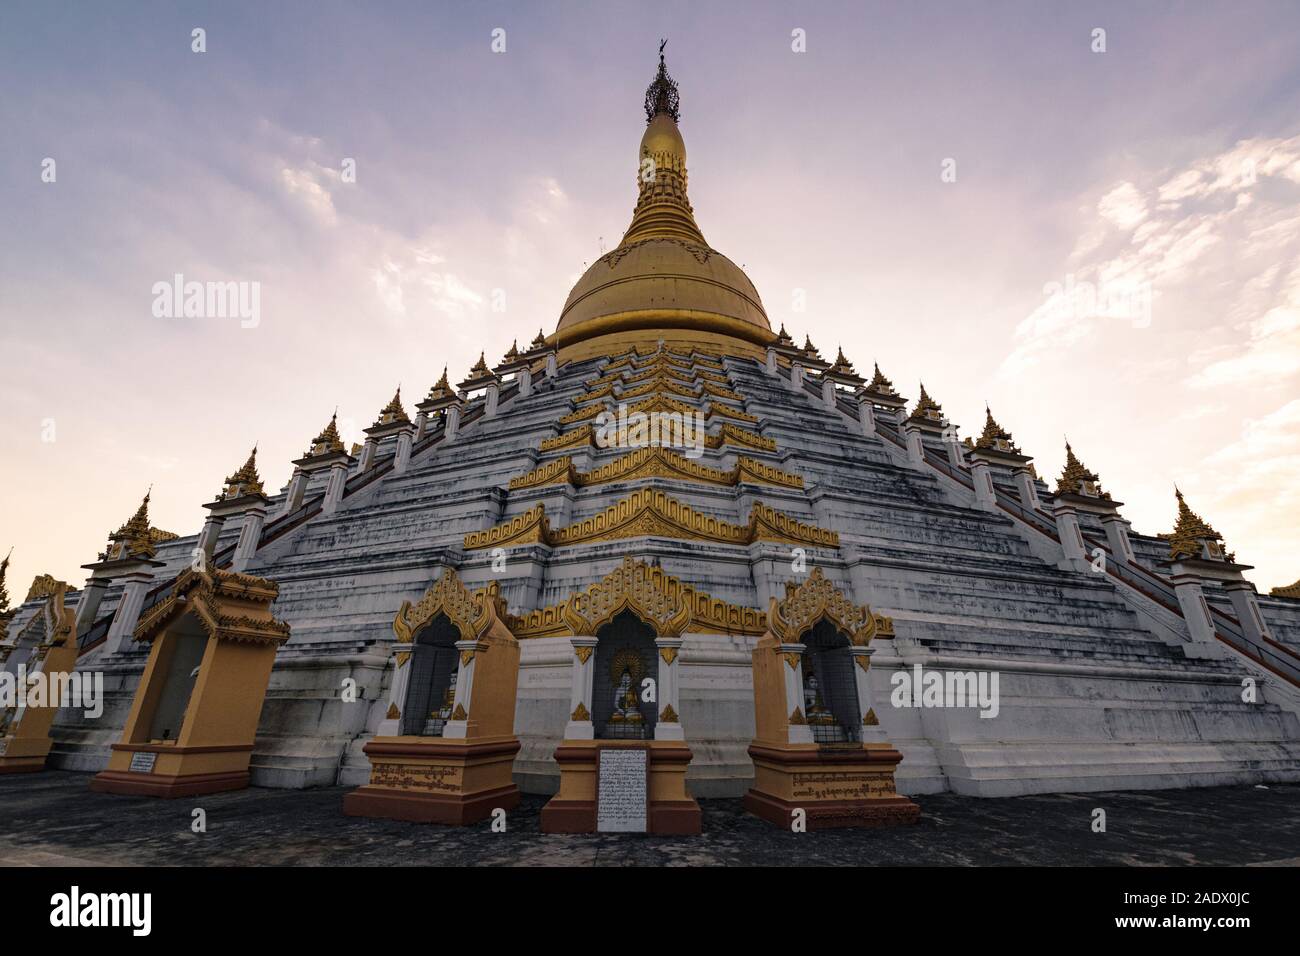 Bago, Myanmar - February 05, 2018: Mahazedi Pagoda at sunset - this is one of the most prominent Buddhist temples in Bago. Stock Photo